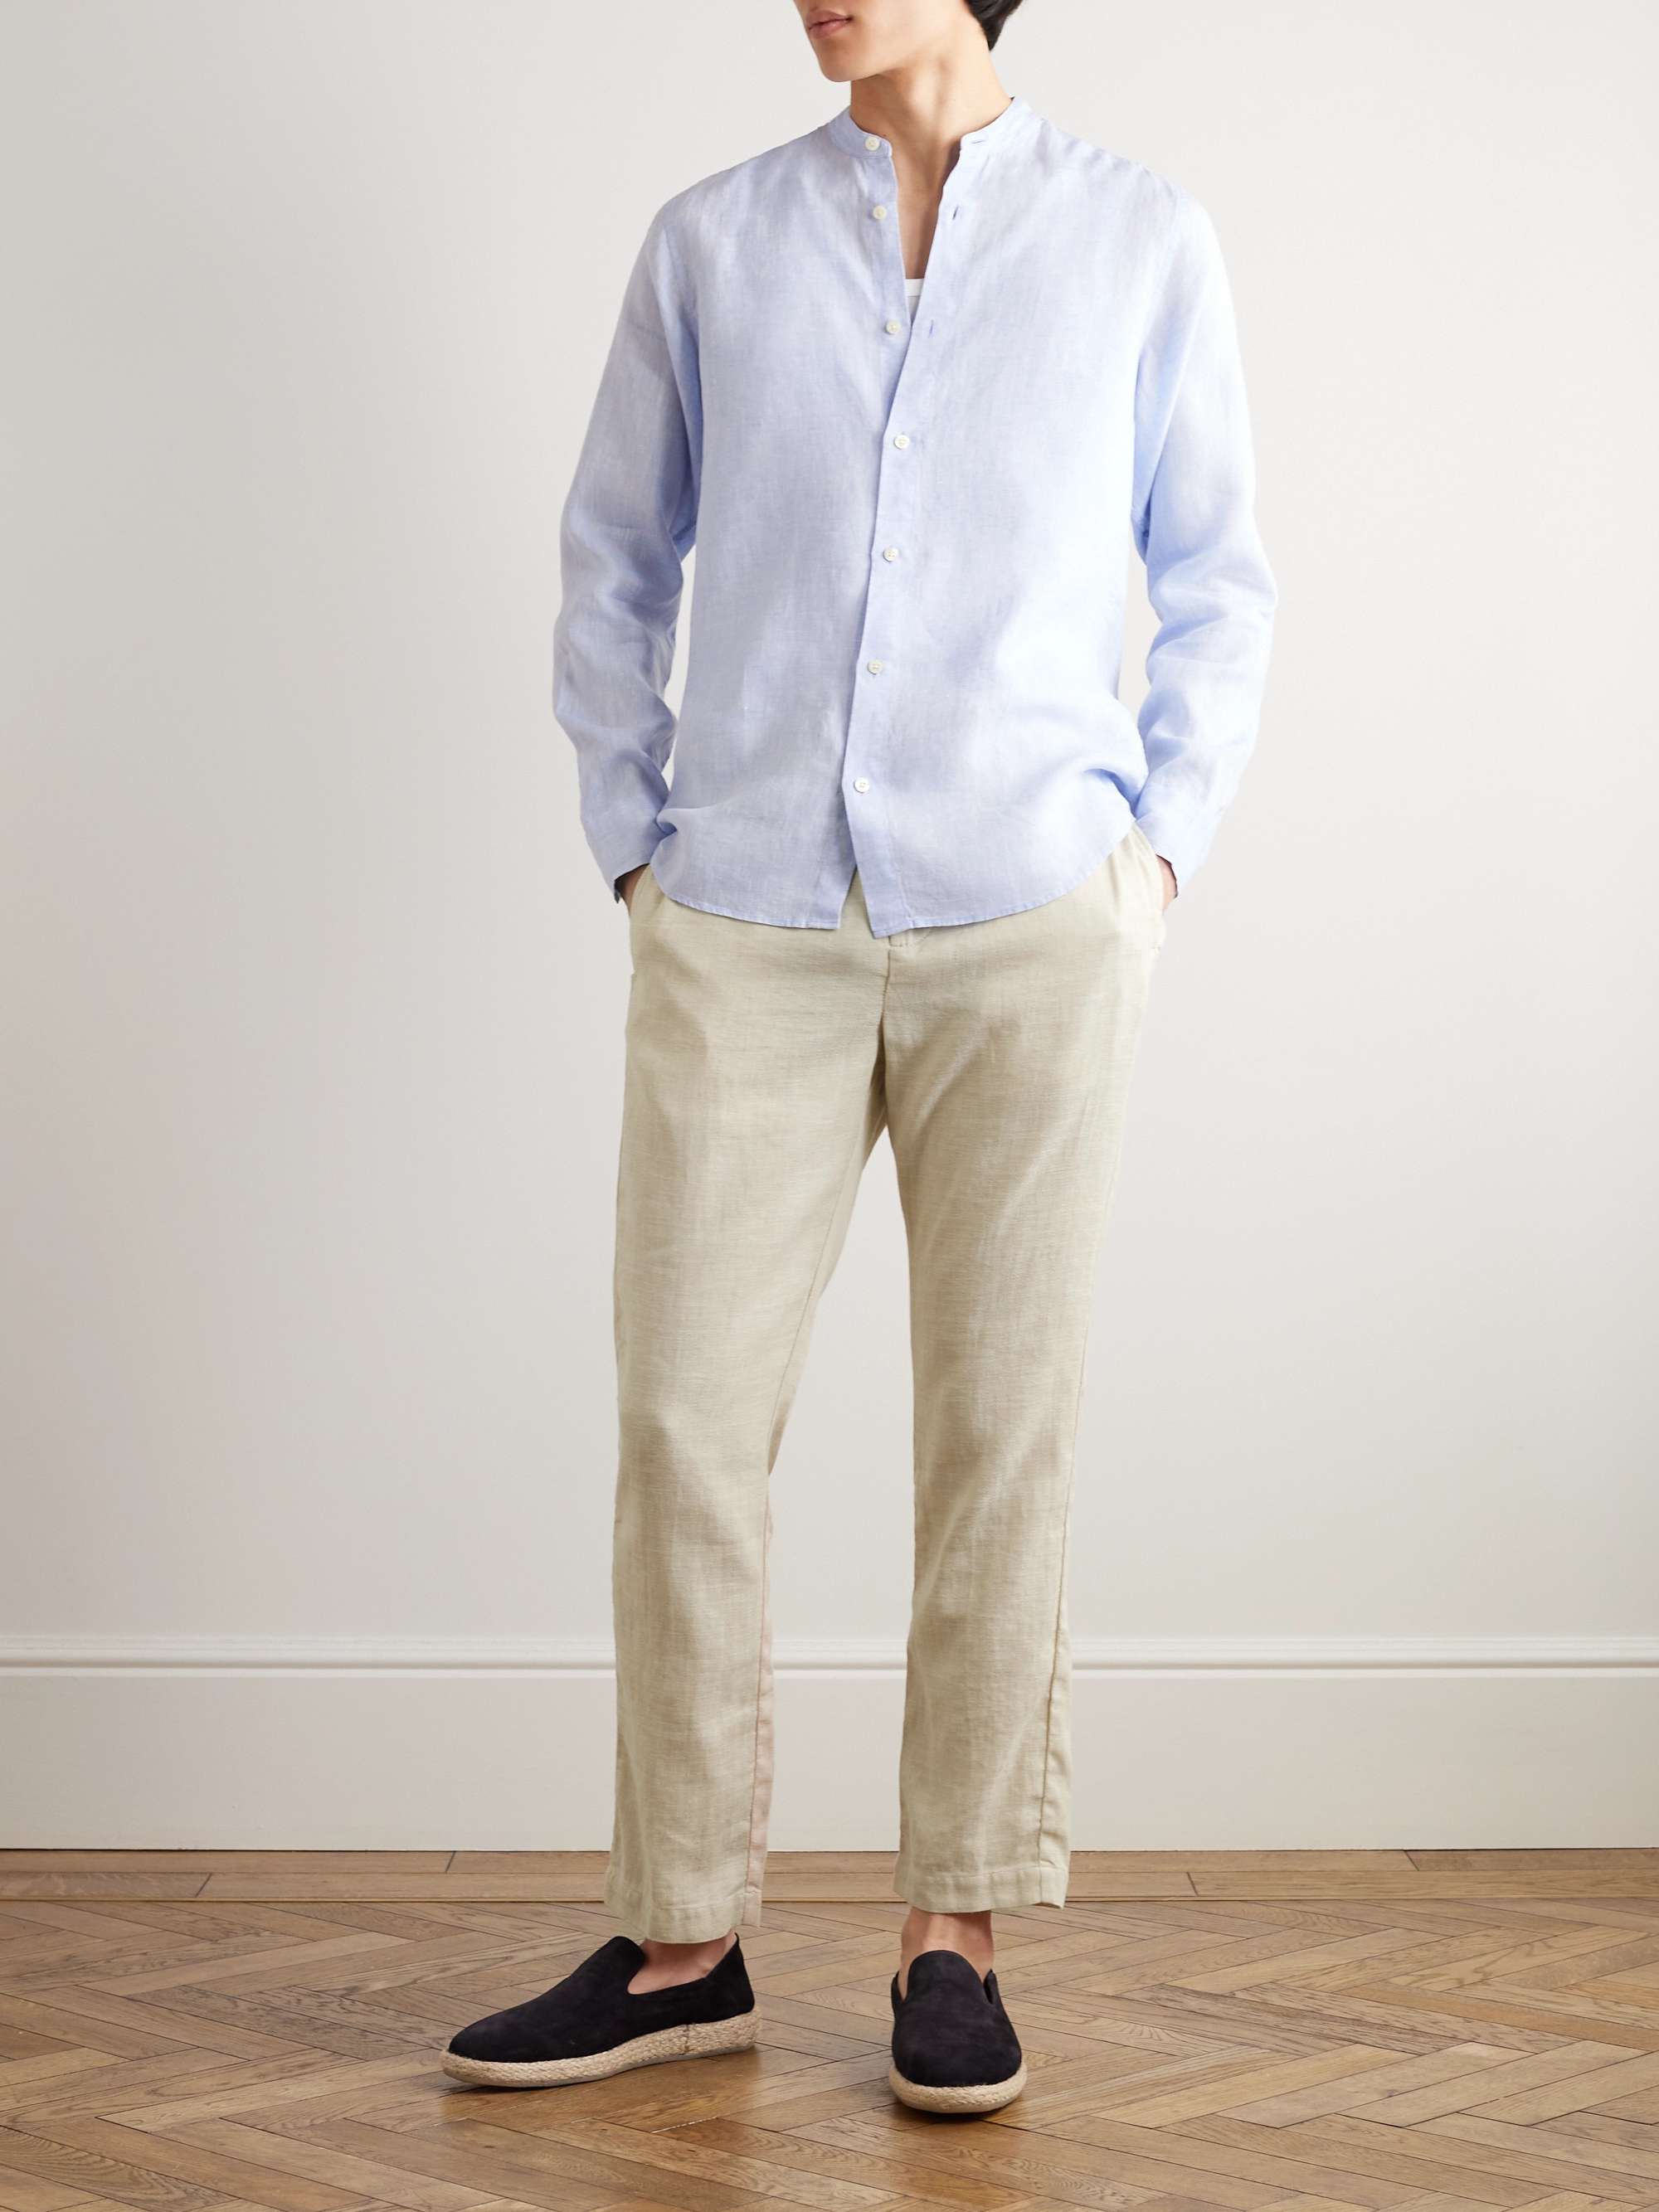 FRESCOBOL CARIOCA Oscar Slim-Fit Tapered Linen and Cotton-Blend Drawstring Trousers